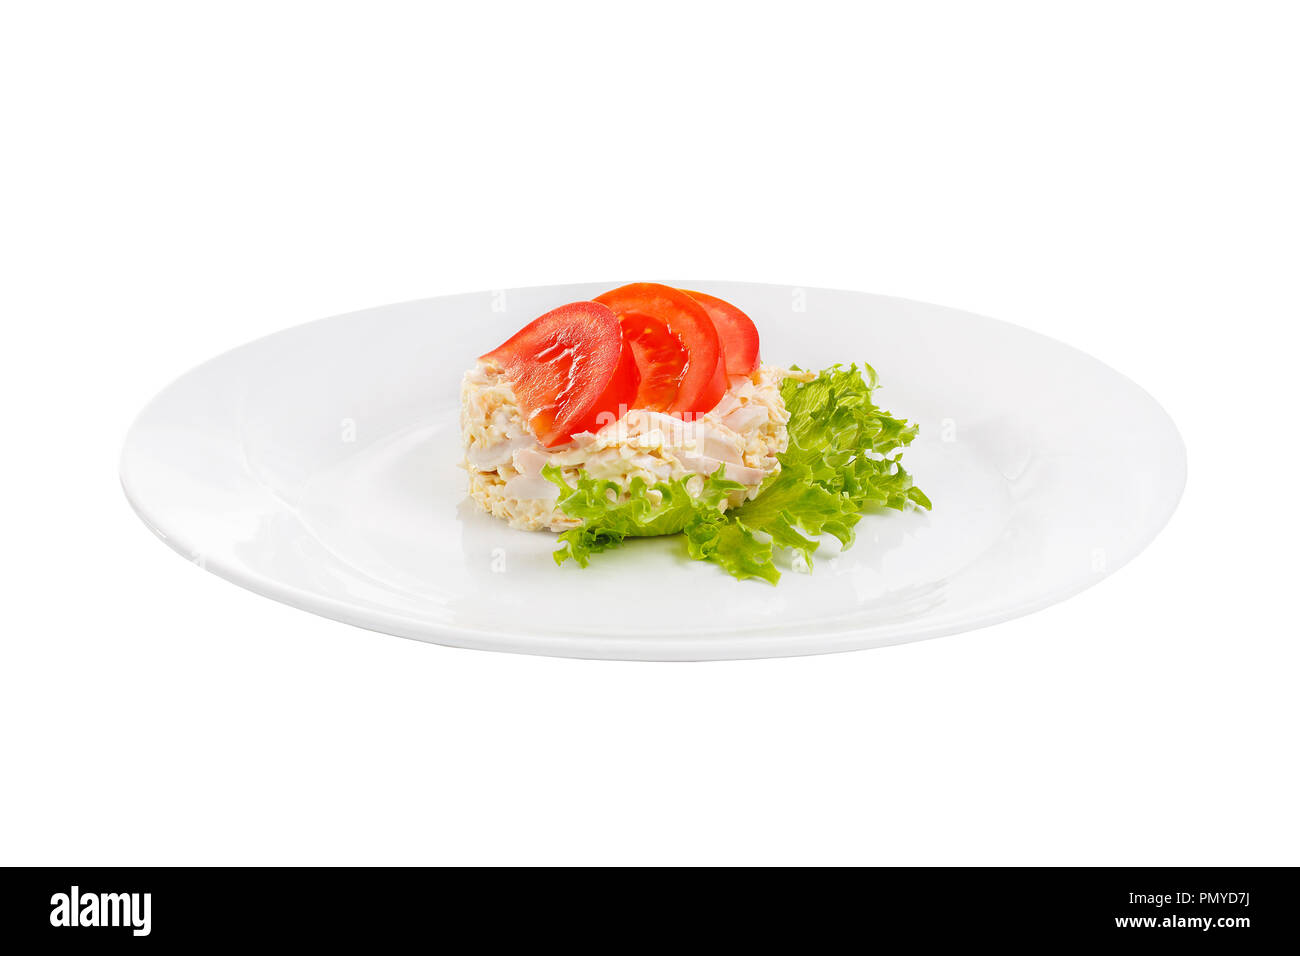 Salad with seafood from squid, eggs, potatoes, cheese, bacon, decorated with tomato slices and lettuce leaf on plate, white isolated background Side v Stock Photo